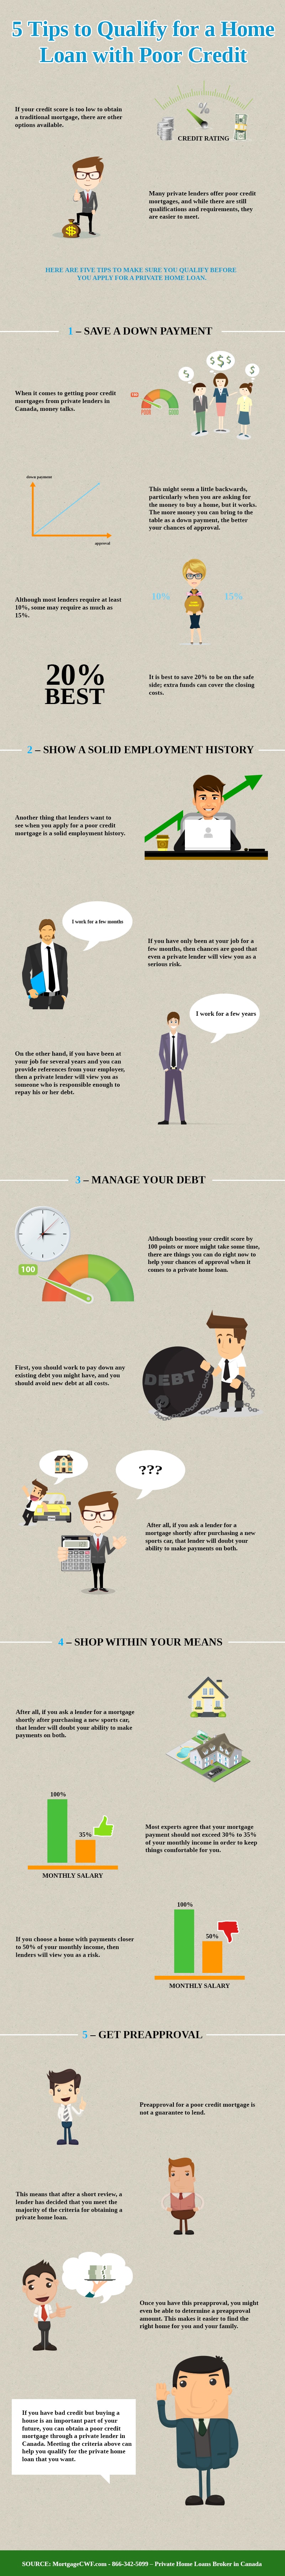 5 Tips to Qualify for a Home Loan with Poor Credit - Infographic